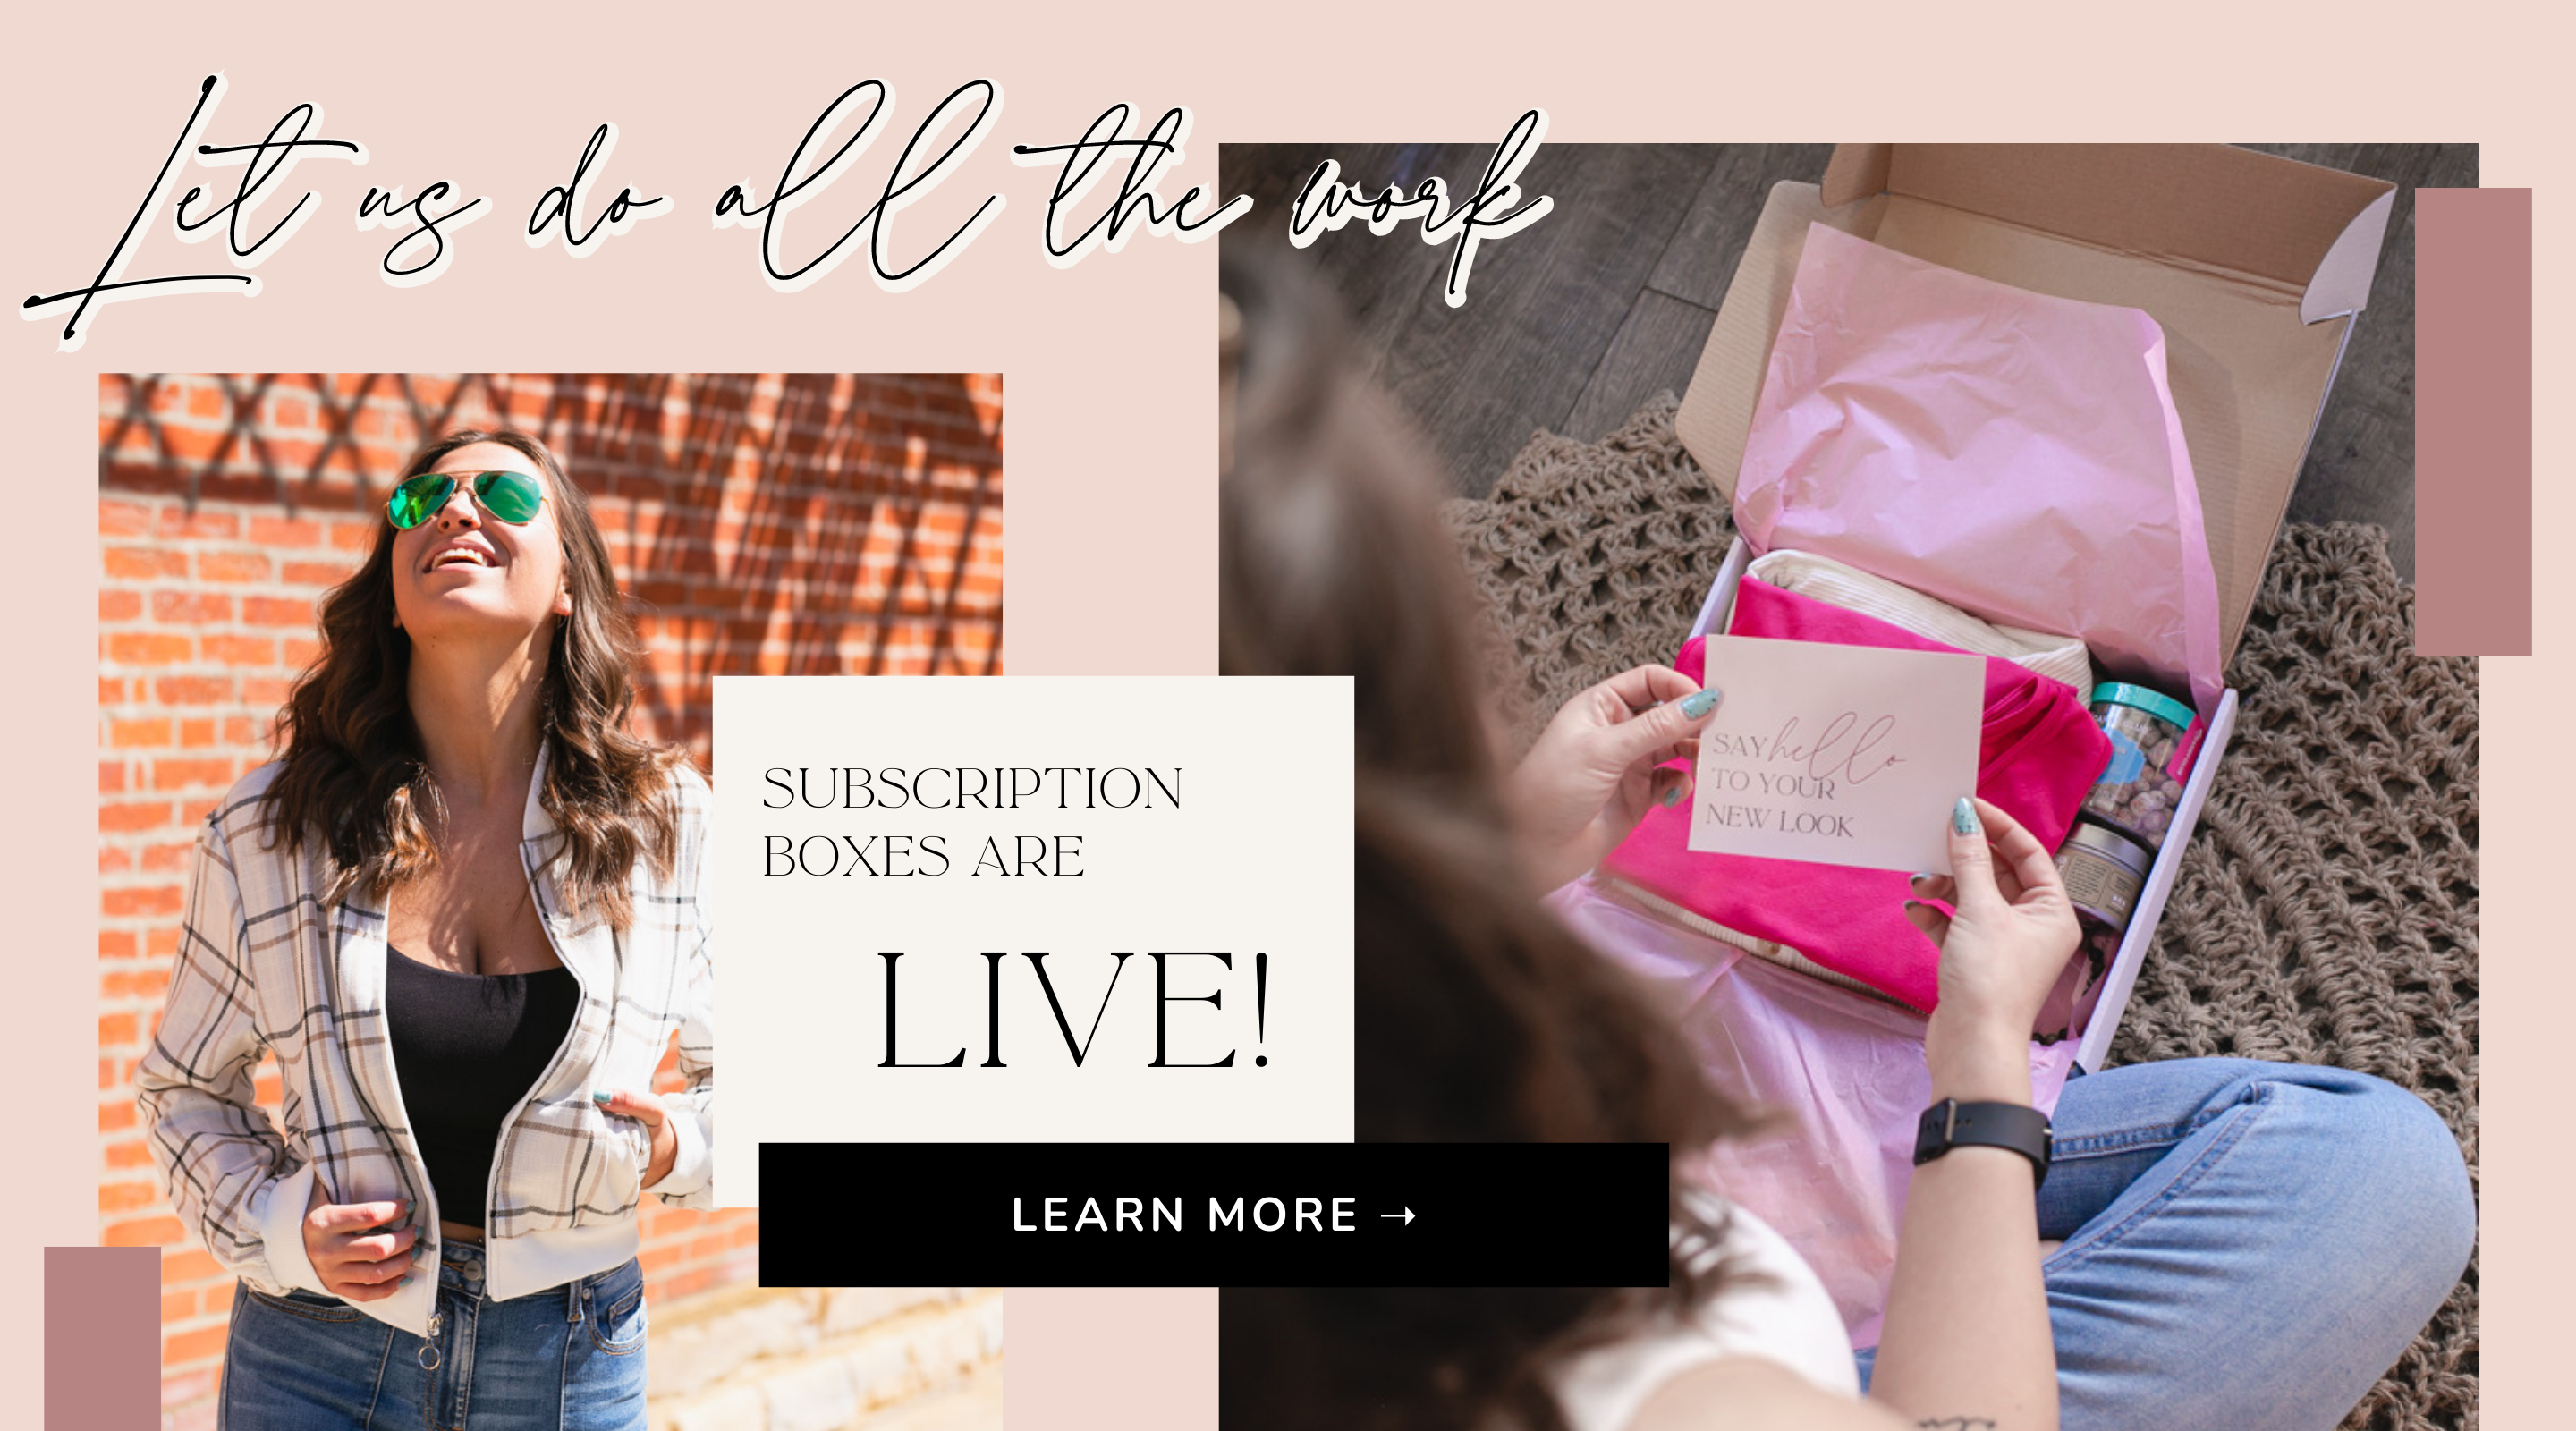 Let us do all the work. Subscription boxes are live! Click here to learn more.